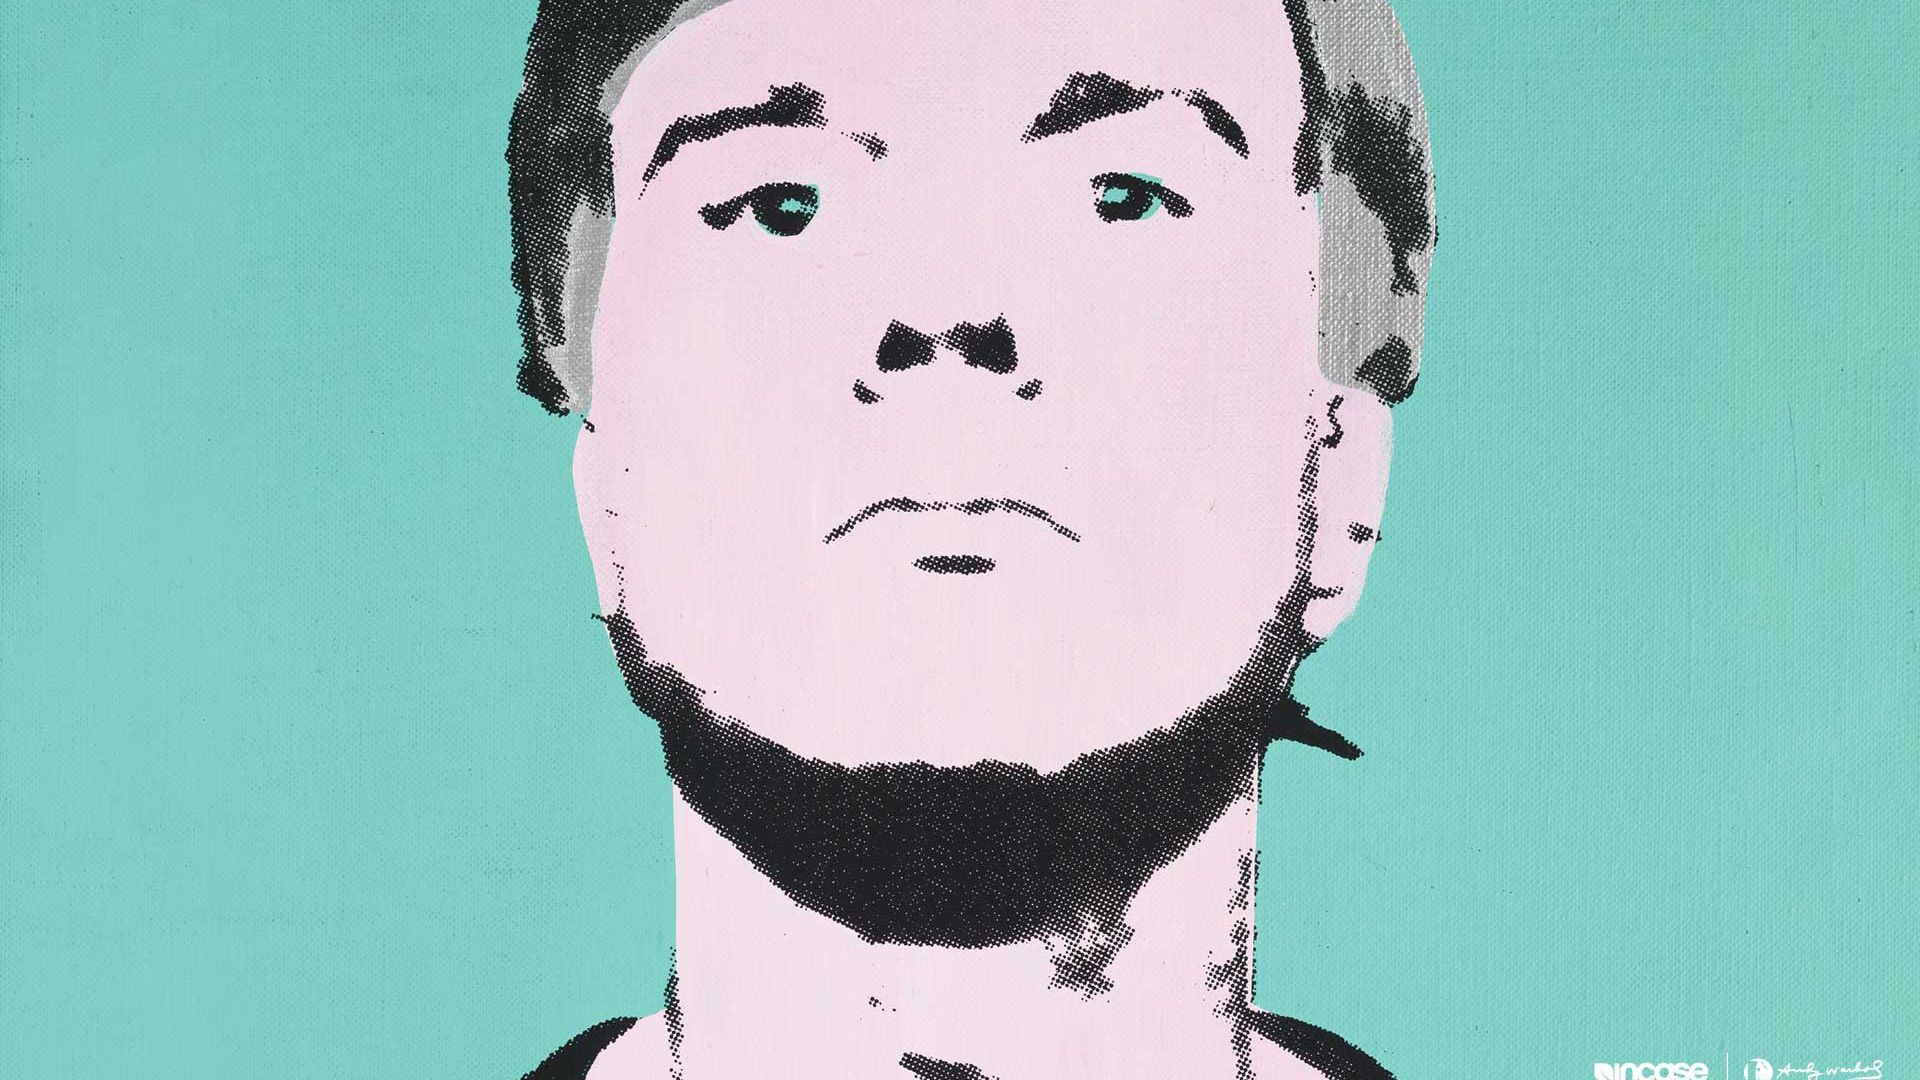 The painting of Andy Warhol young man Desktop wallpaper 1920x1080